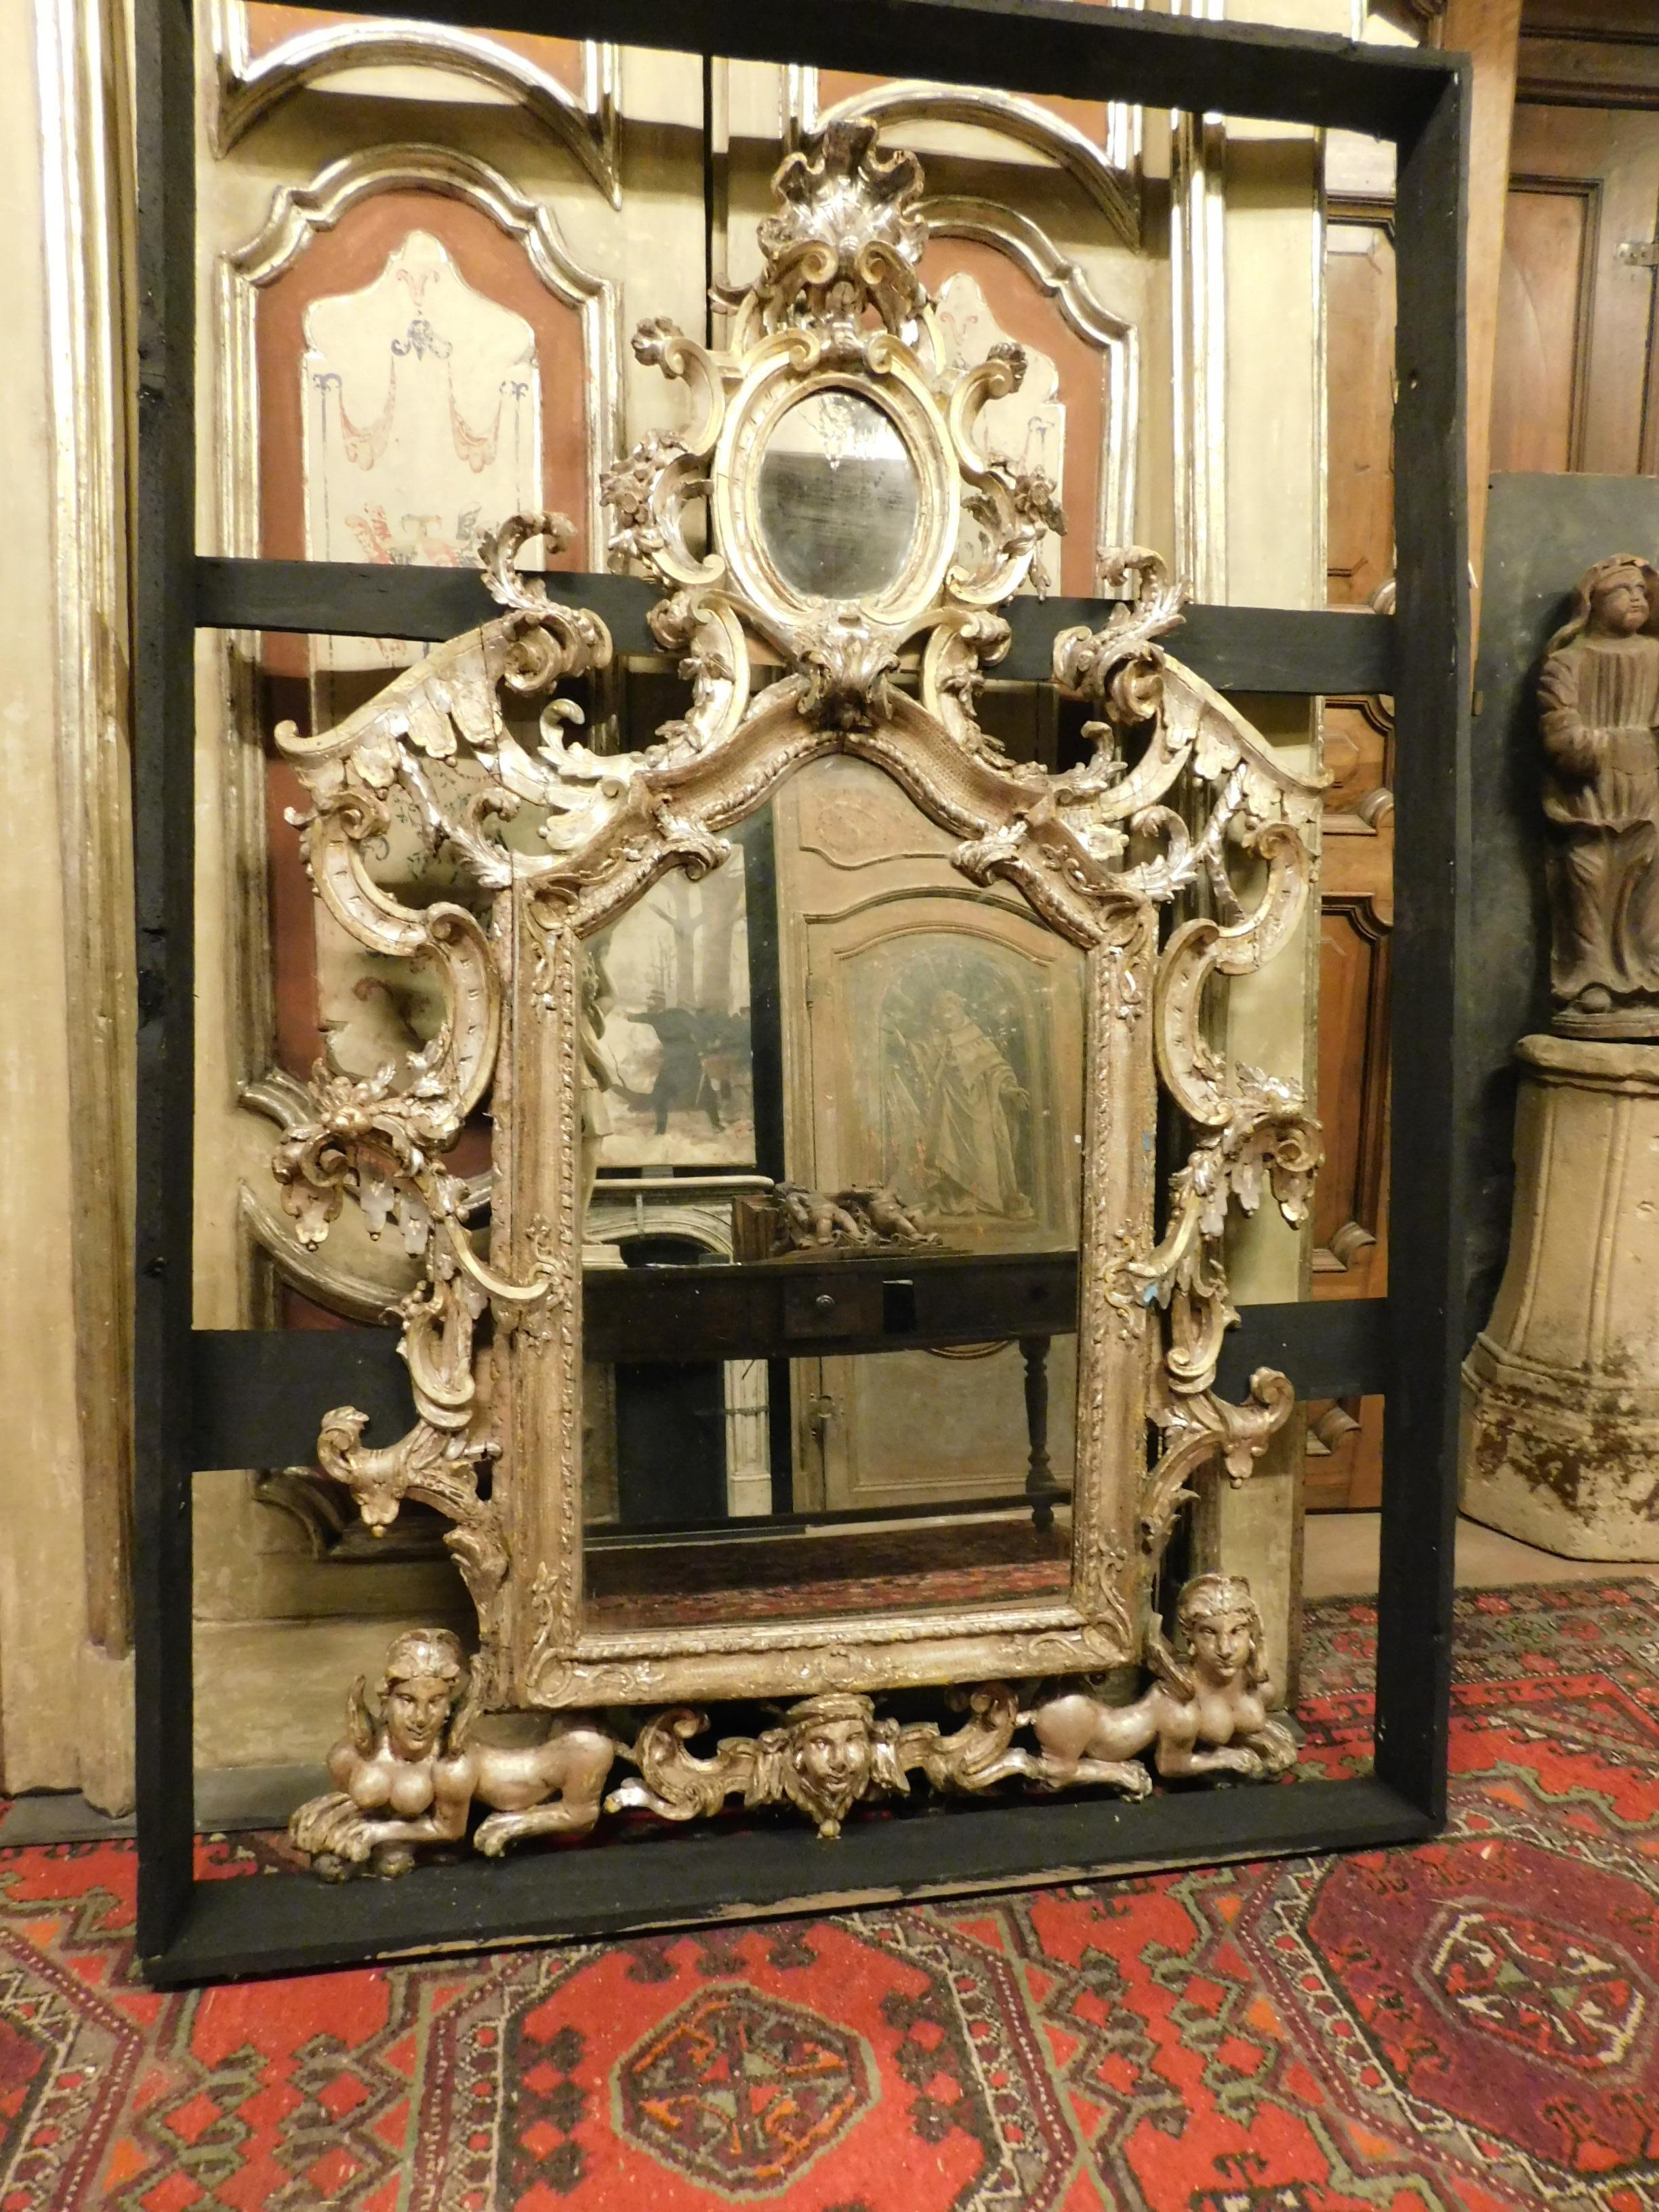 Ancient and large mirror, richly carved by hand and silver leaf, with double mirror and depictions of mythological creatures carved in the wood of the frame, built to position it over an important fireplace in a palace in Naples (Italy), built in